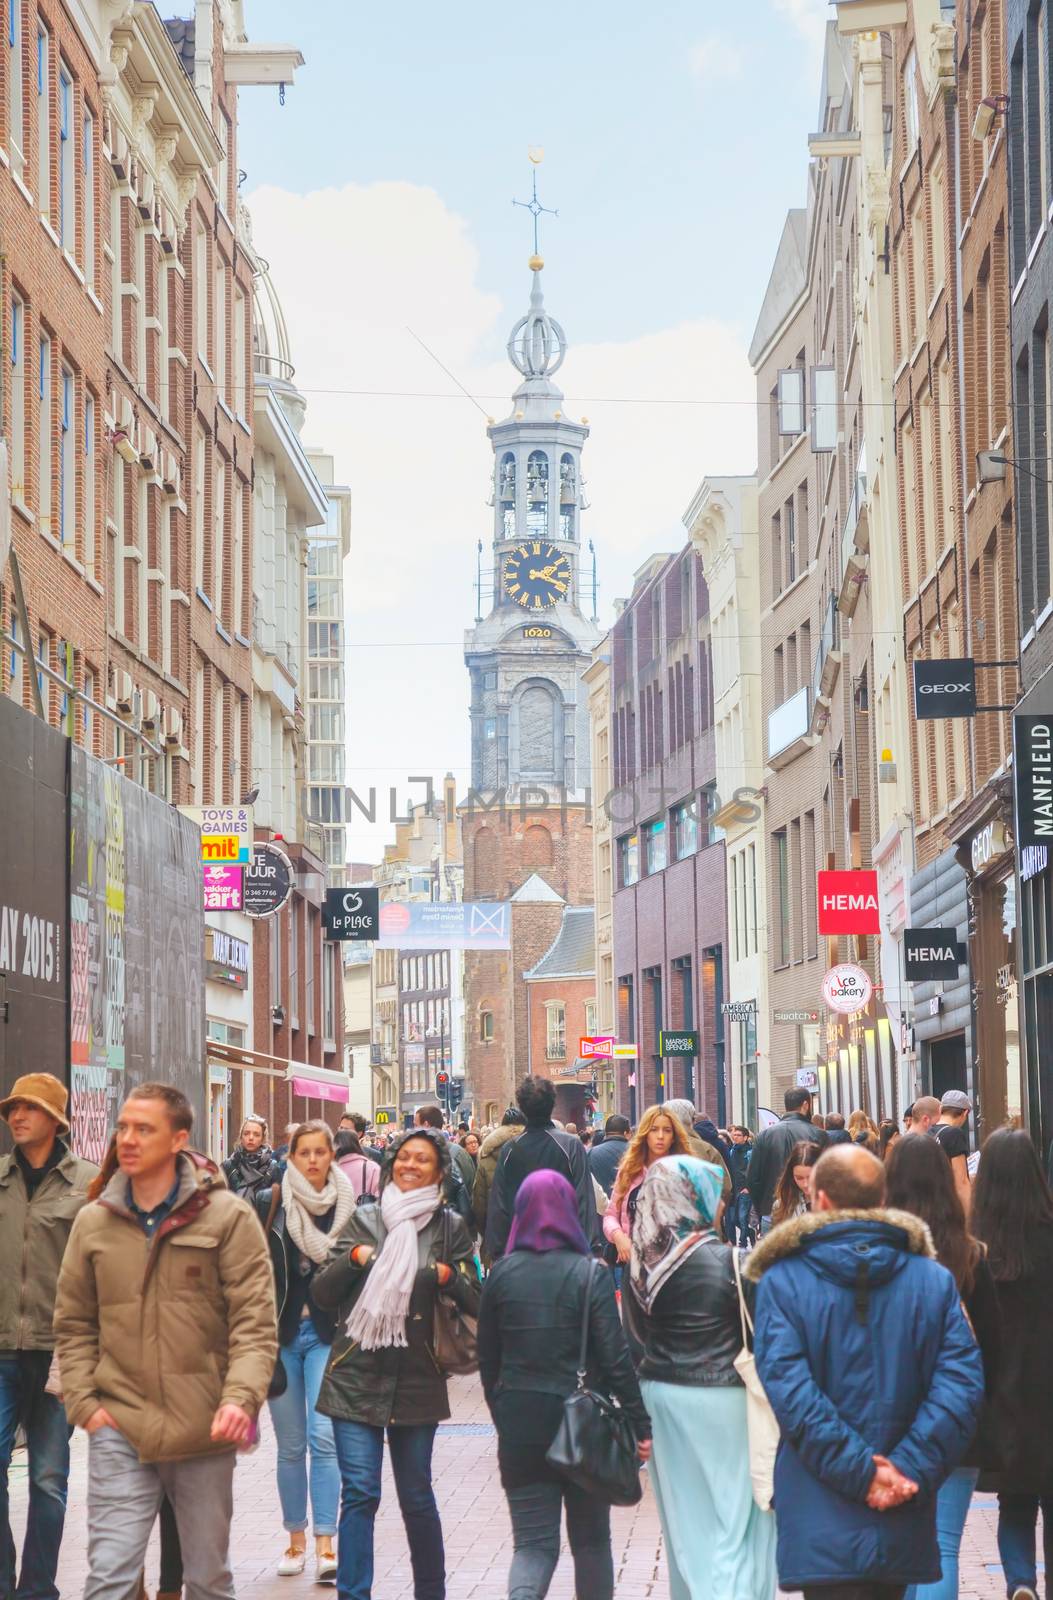 Narrow street of Amsterdam crowded with tourists by AndreyKr